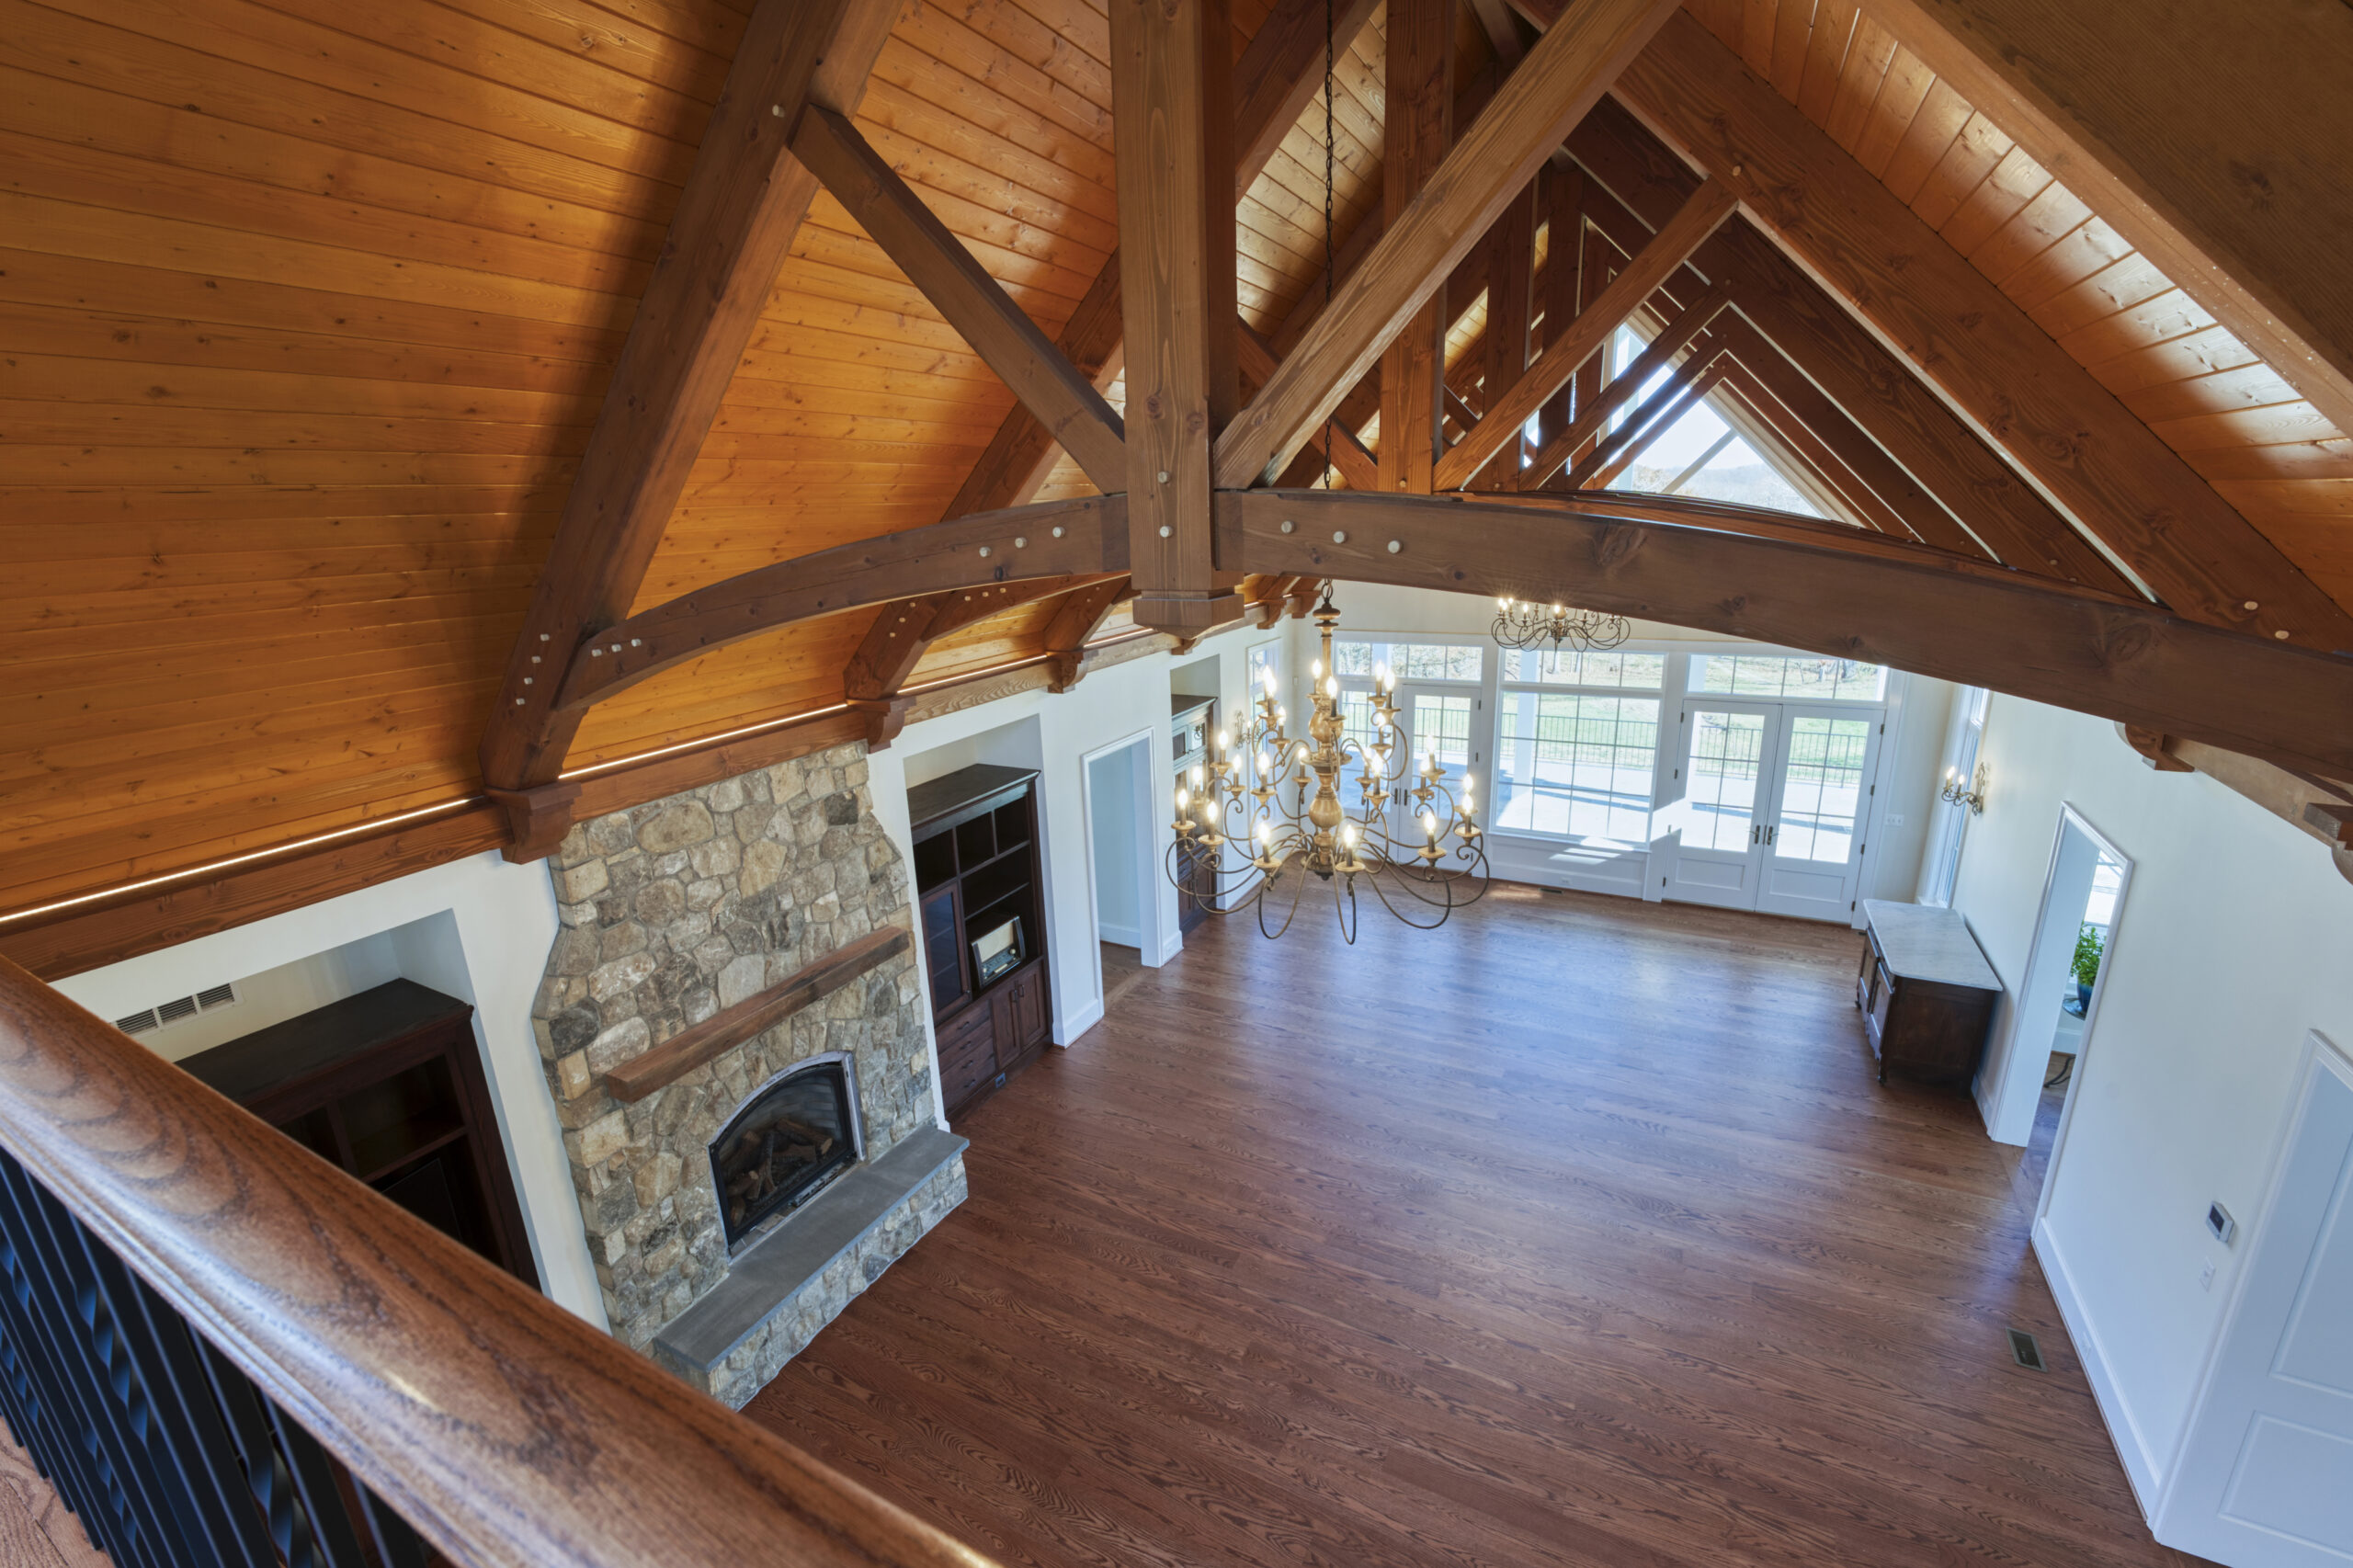 Professional interior photo of custom build new home by Black Oak Construction - showing the great room from the balcony above with hardwood floors, vaulted wooden ceiling with wooden trusses, stone fireplace and built-in cabinets on either side